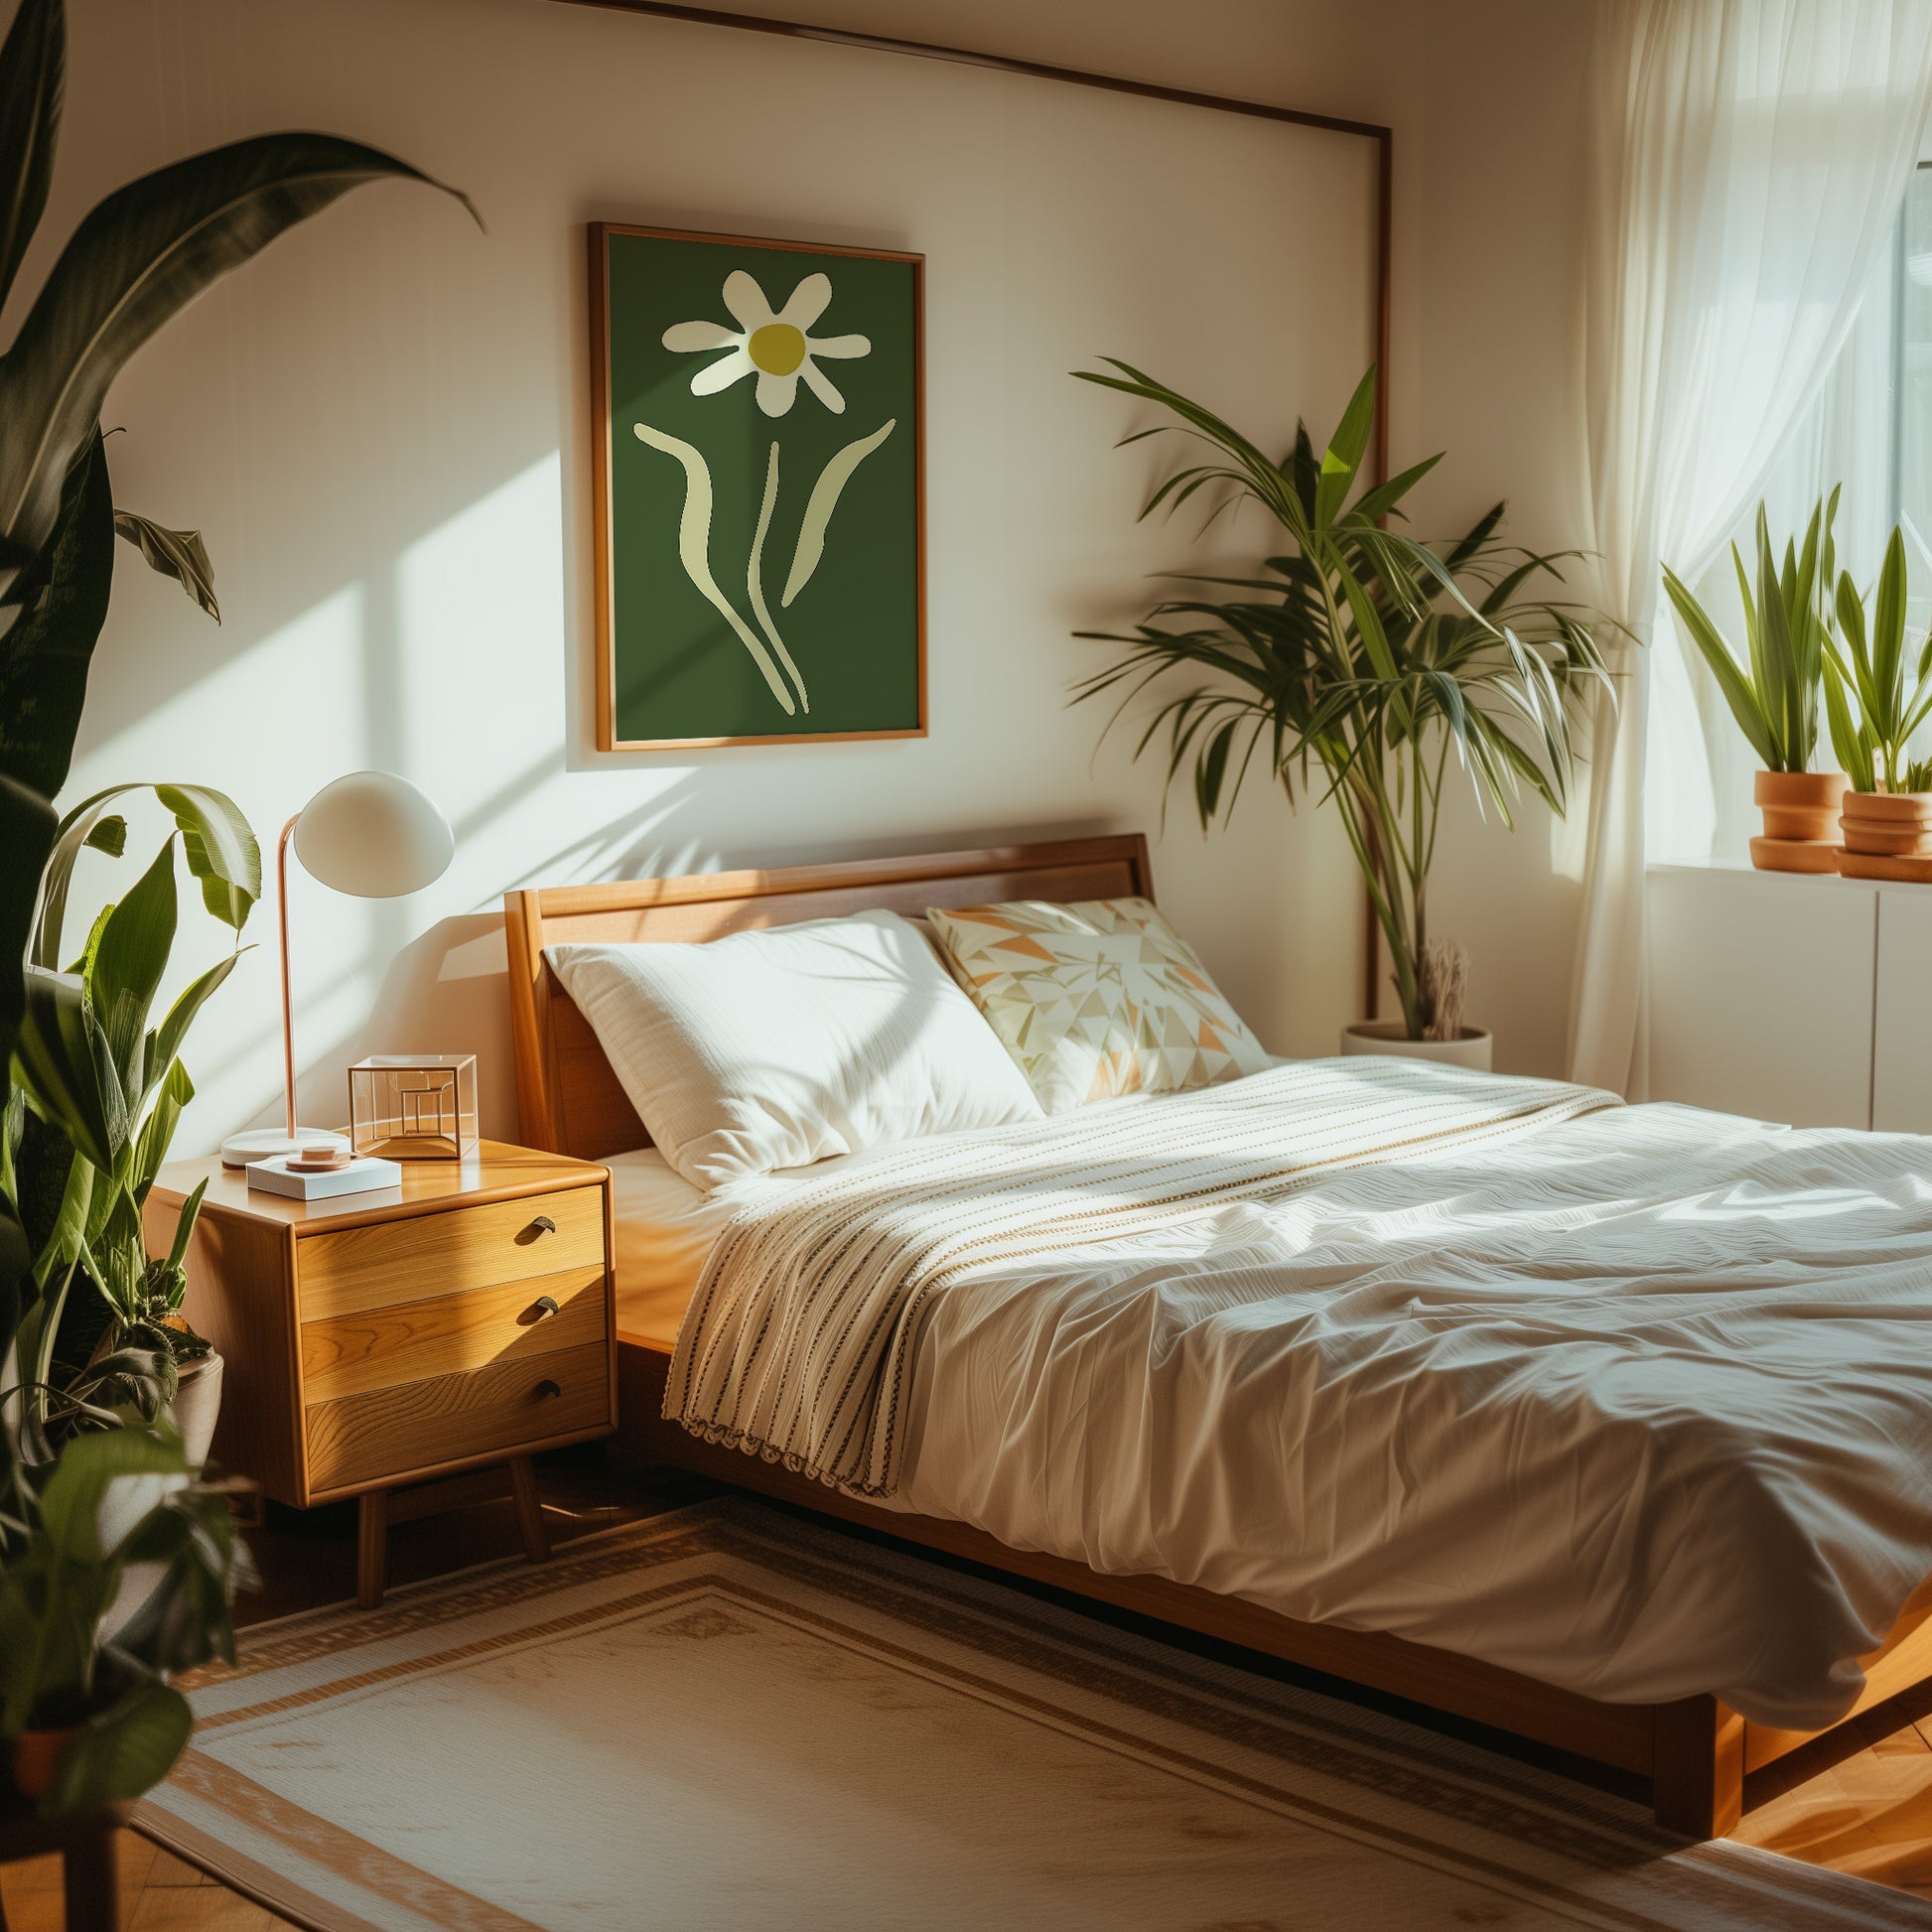 A cozy bedroom with a wooden bed, white bedding, plants, and a wall art of a flower.